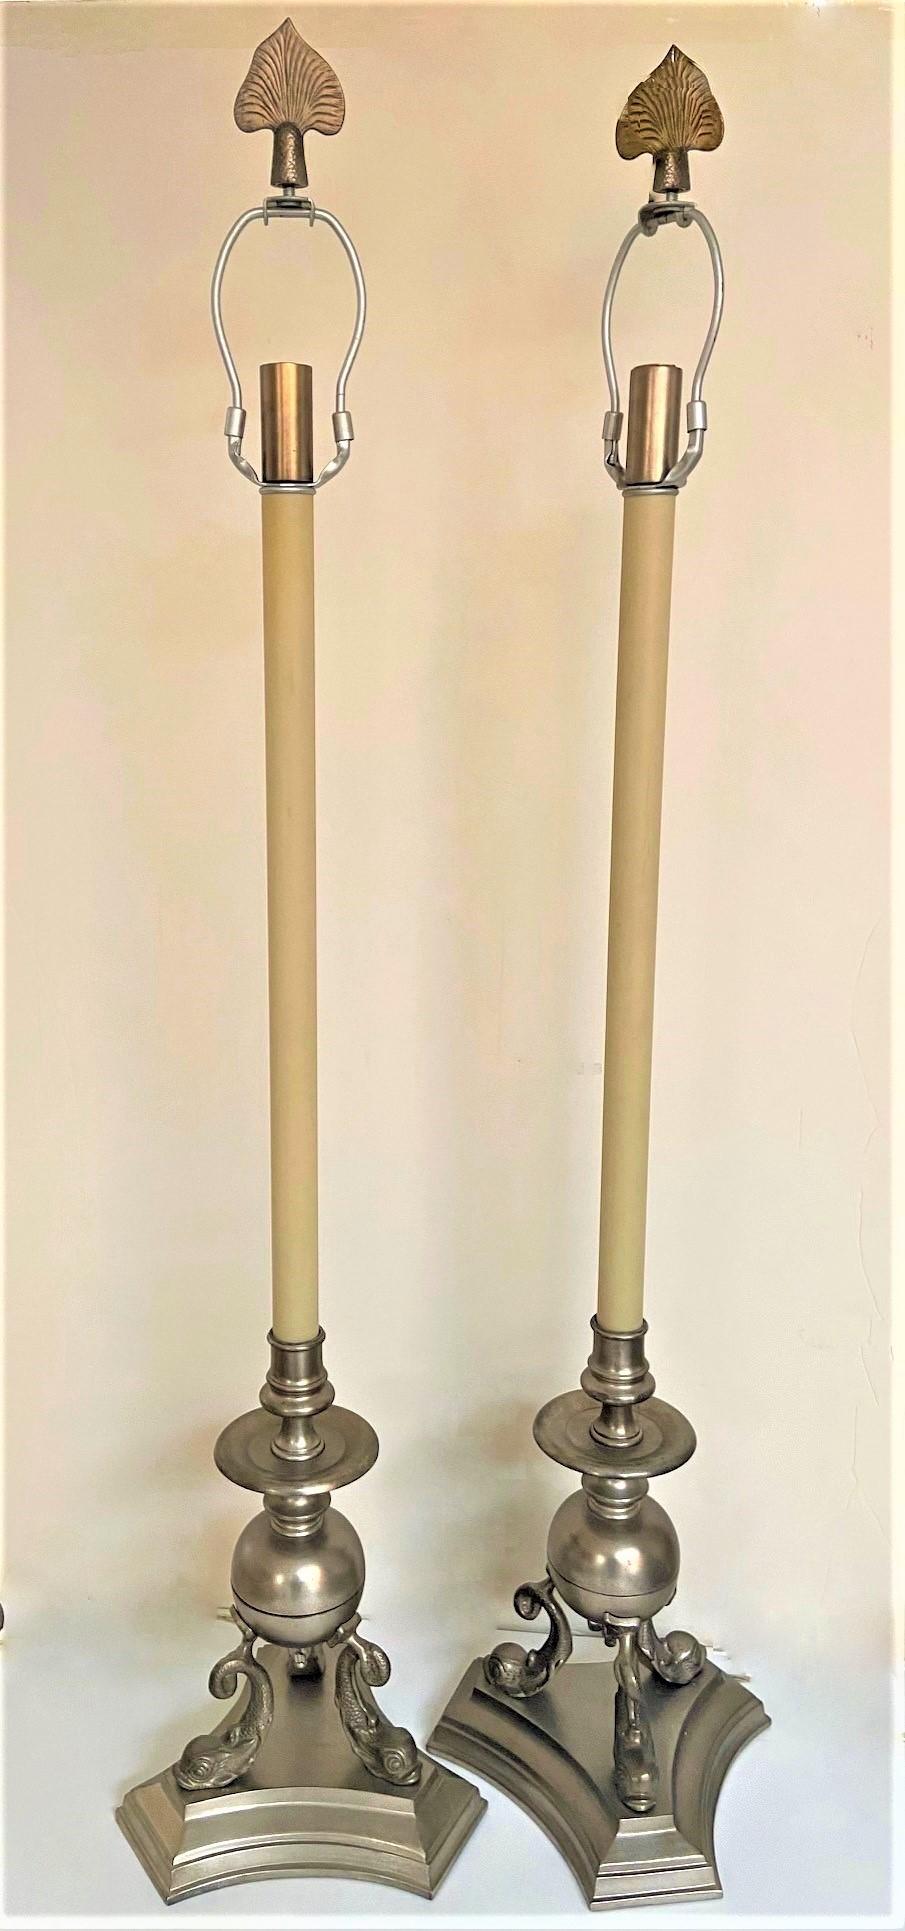 Pair of Vintage Dolphin Koi Fish Base Tall Candlestick Lamps by Chapman & Co. For Sale 1